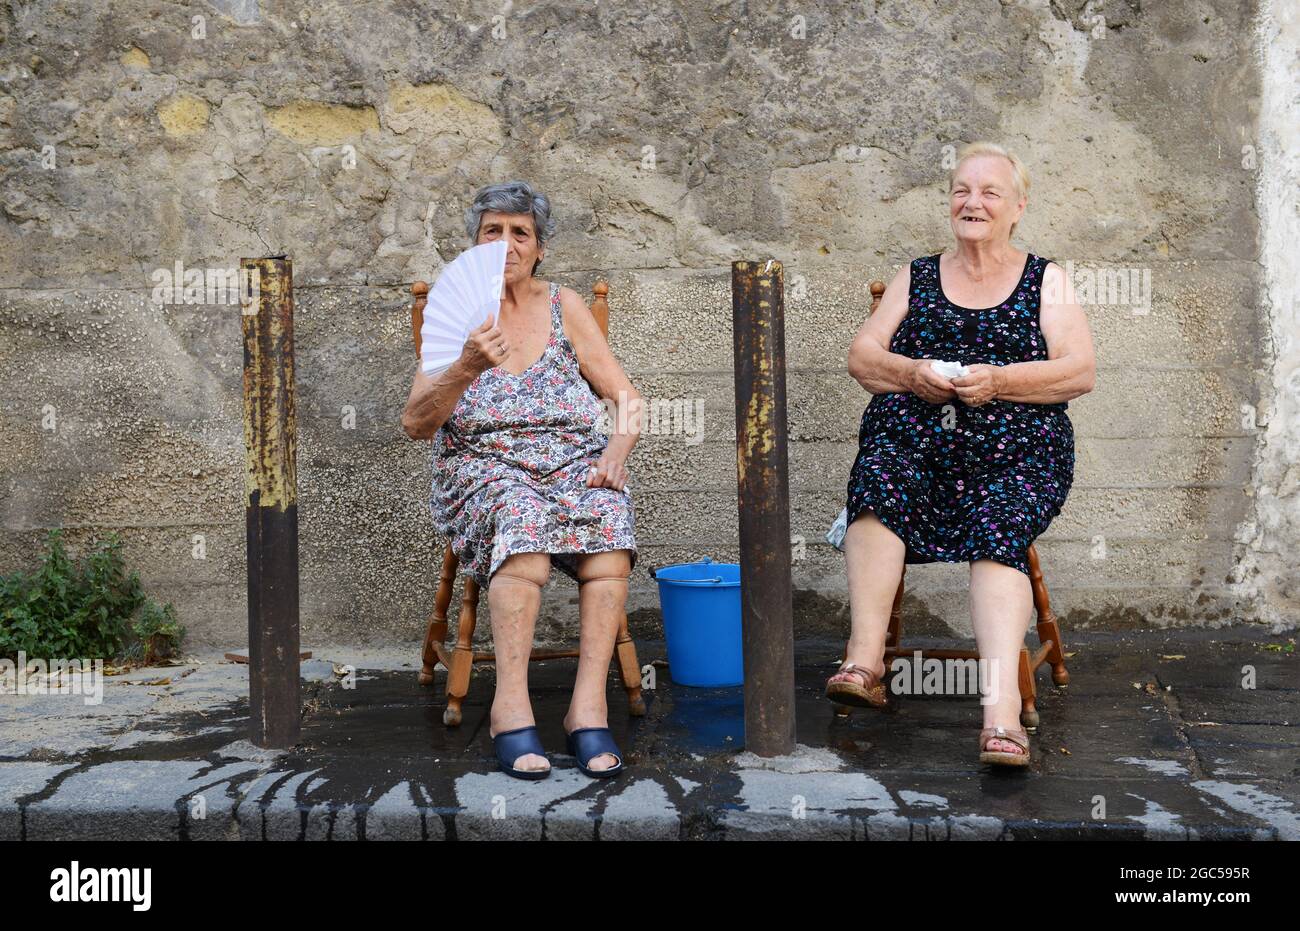 July 2015, Naples Italy. Elderly Italian women sitting outside on the street with a bucket of water to help with the scorching heat. Stock Photo